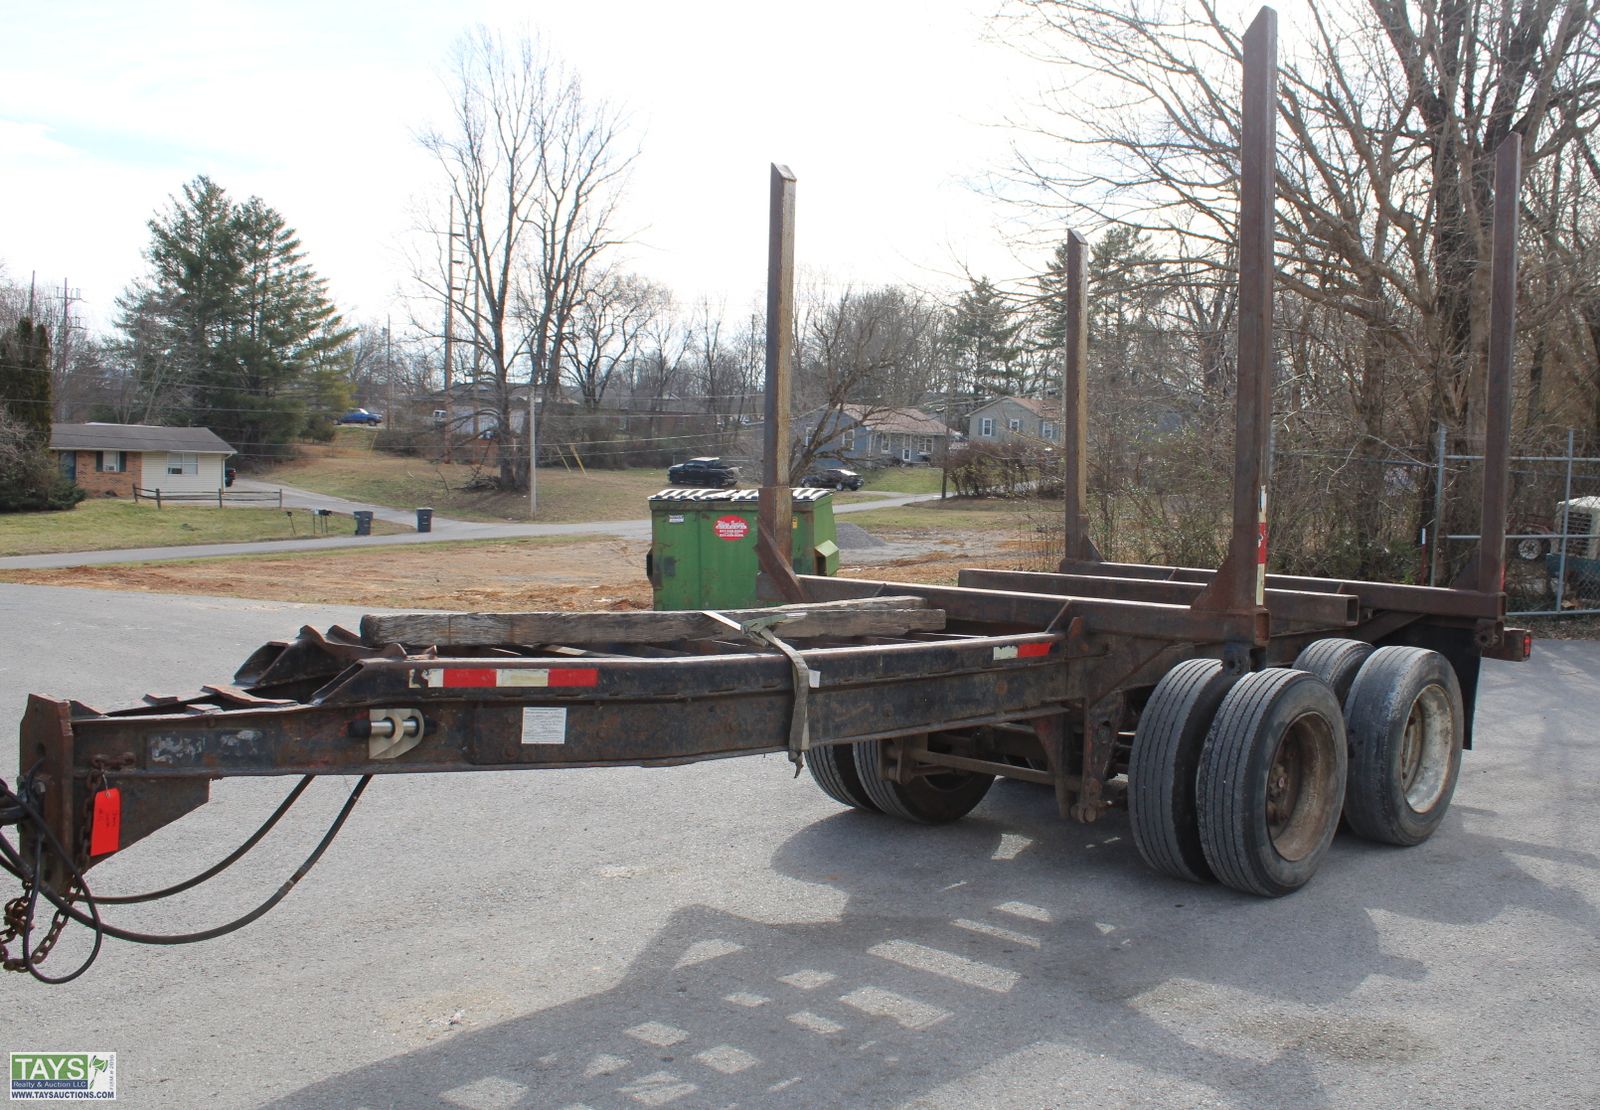 Tays Realty & Auction - Auction: ONLINE ABSOLUTE AUCTION: SEMIS - SPREADERS  - HAY EQUIPMENT - TRAILERS - ATVS - VEHICLES ITEM: 22' Pintle Hitch Log  Trailer